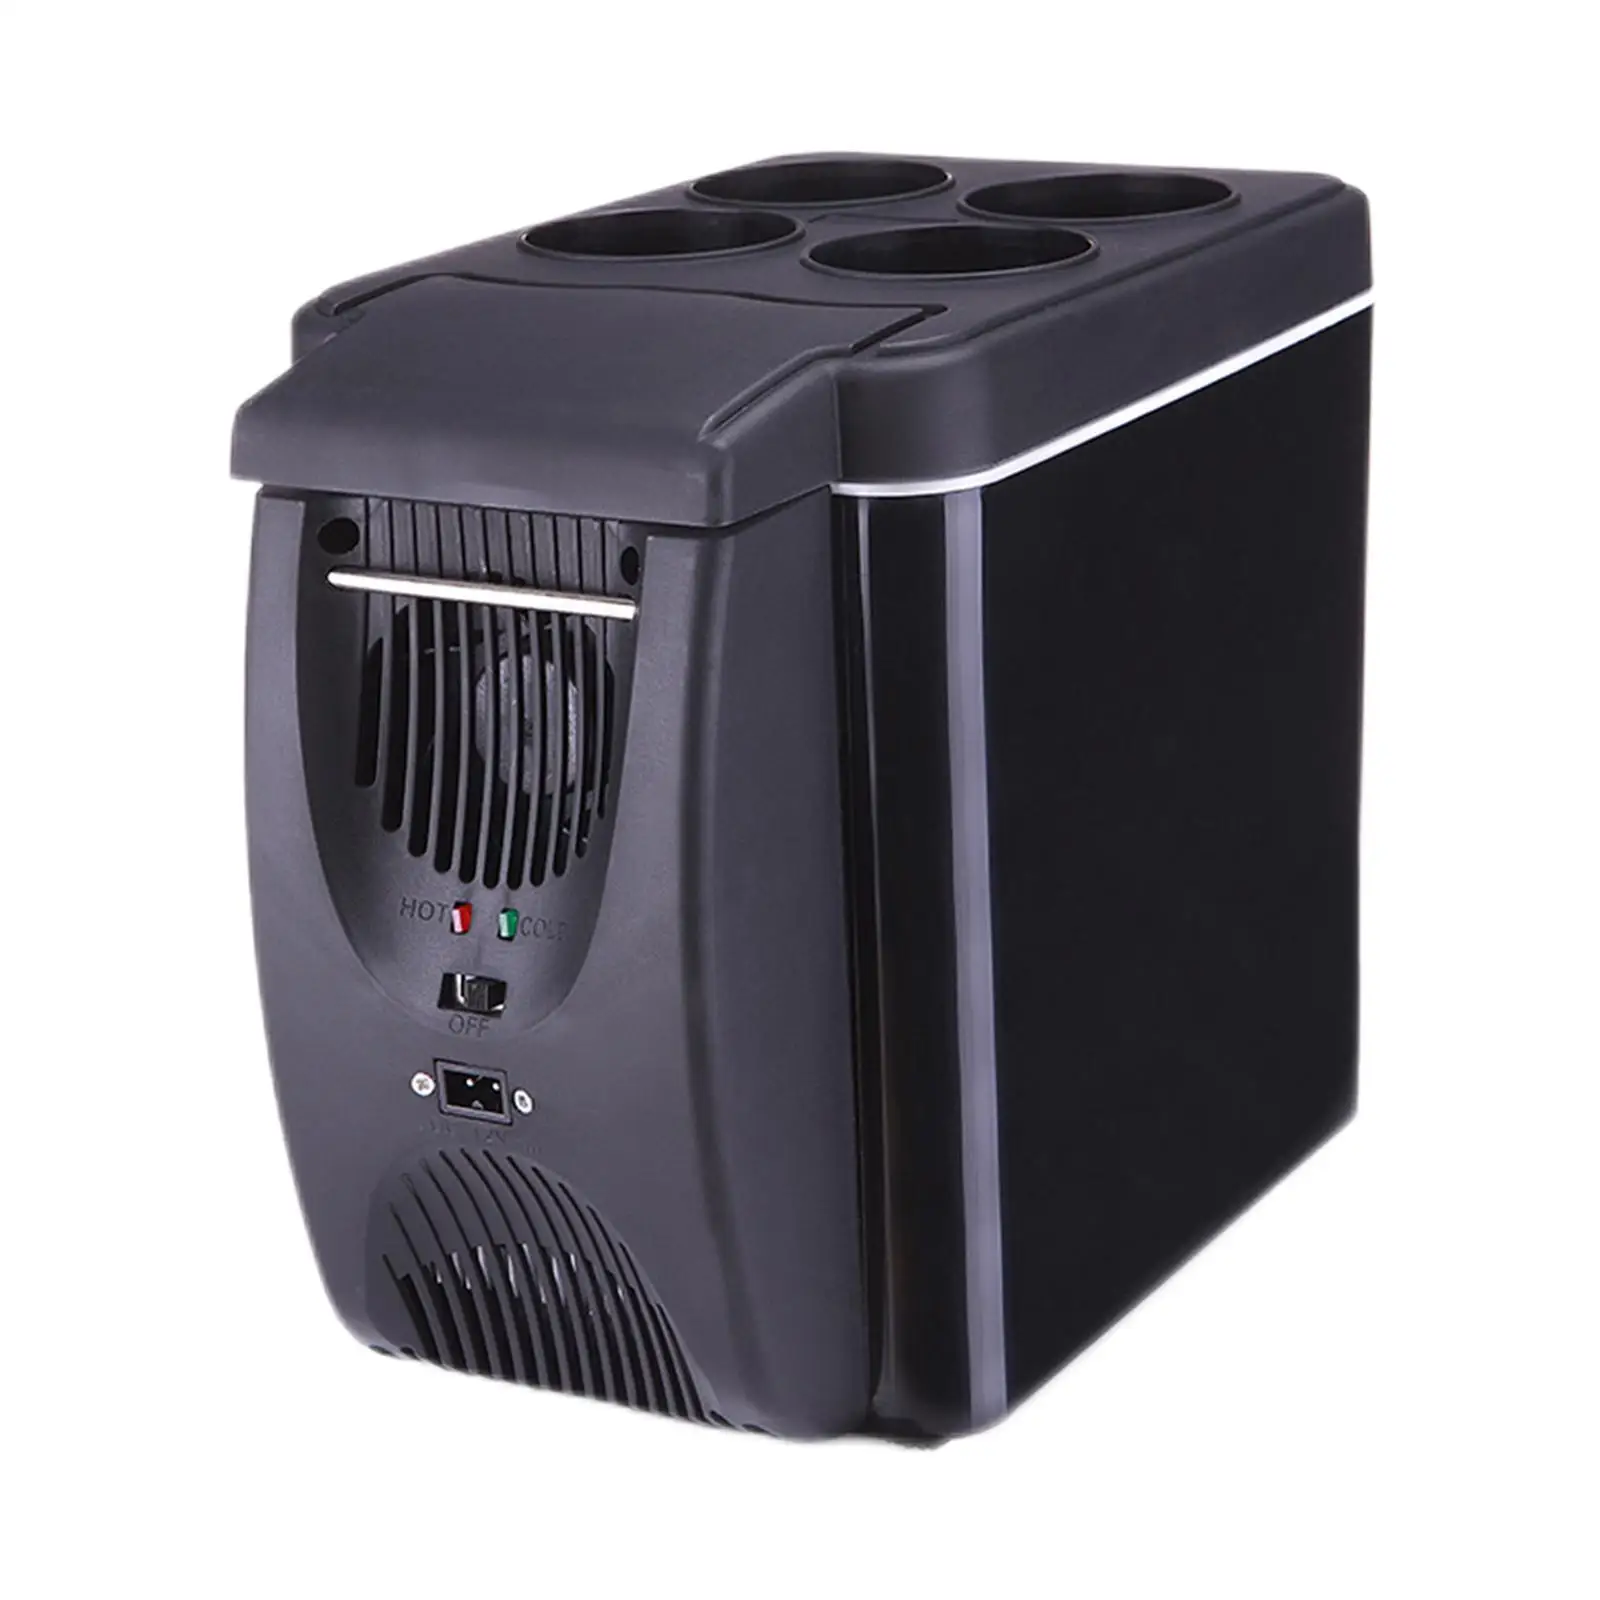 6 Liter Mini Fridge, Dual Using Low  Cooler and Warmer 12 Refrigerator Car Refrigerator for Camping Cars Office Travel Skincare